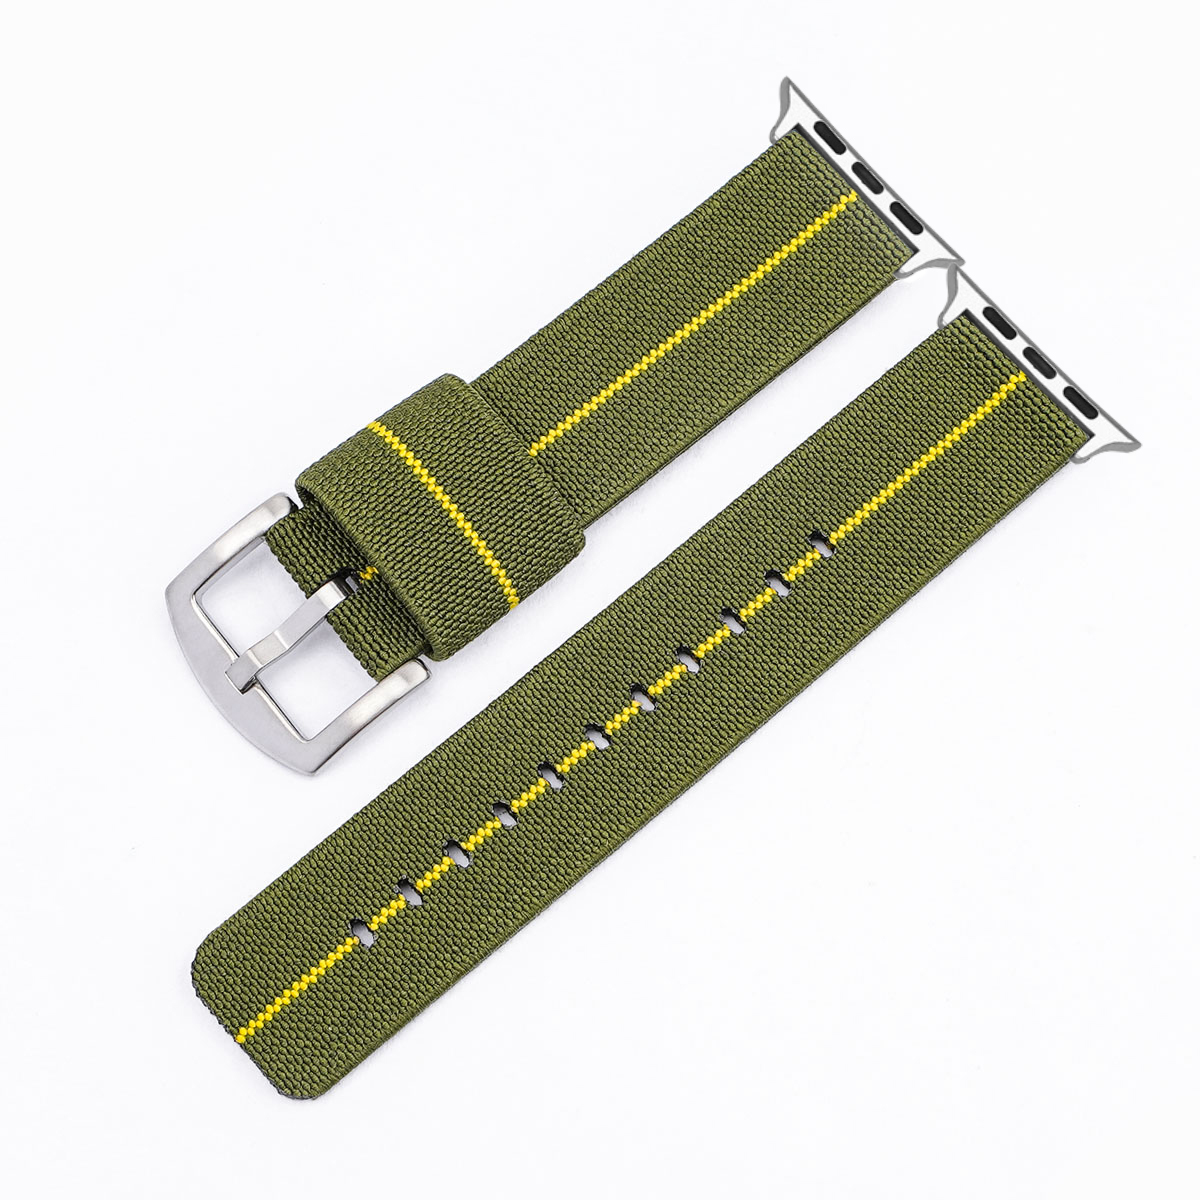 CBIW276 Military Fabric Watch Strap Nylon Wristbands For Apple Watchbands For iWatch Band